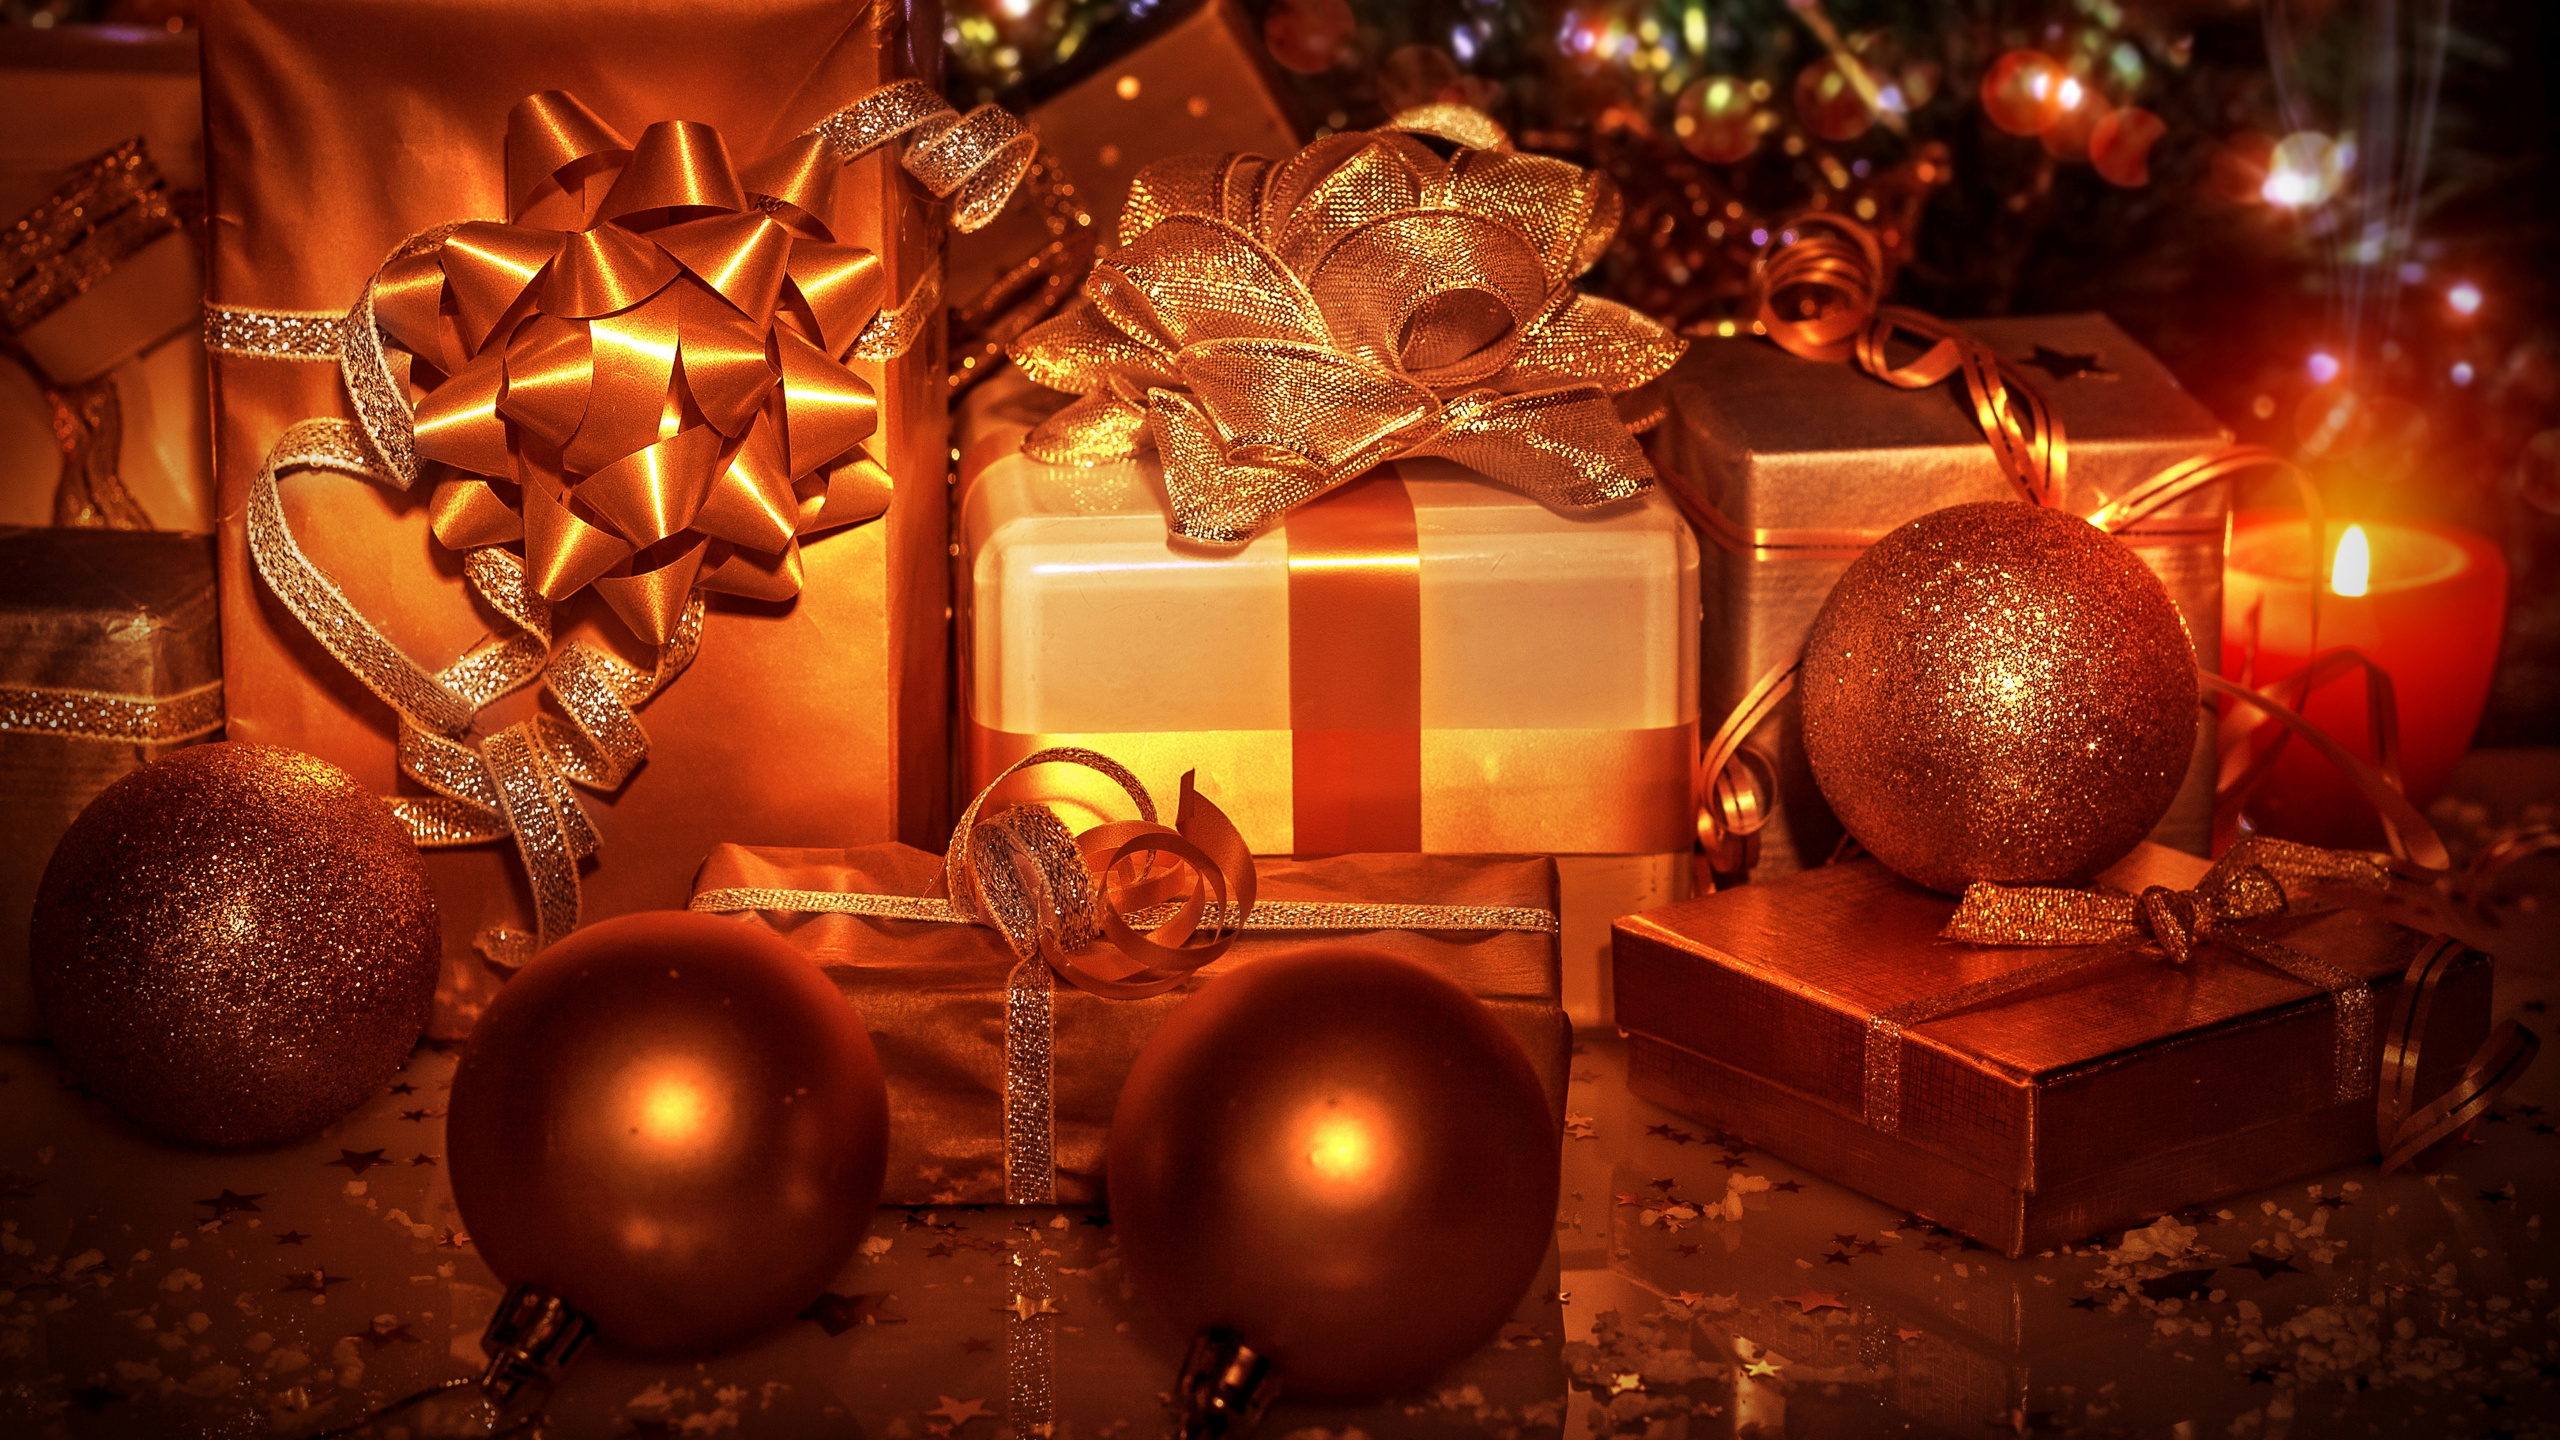 Christmas Day, Christmas Ornament, Christmas Tree, New Year, Christmas Decoration. Wallpaper in 2560x1440 Resolution